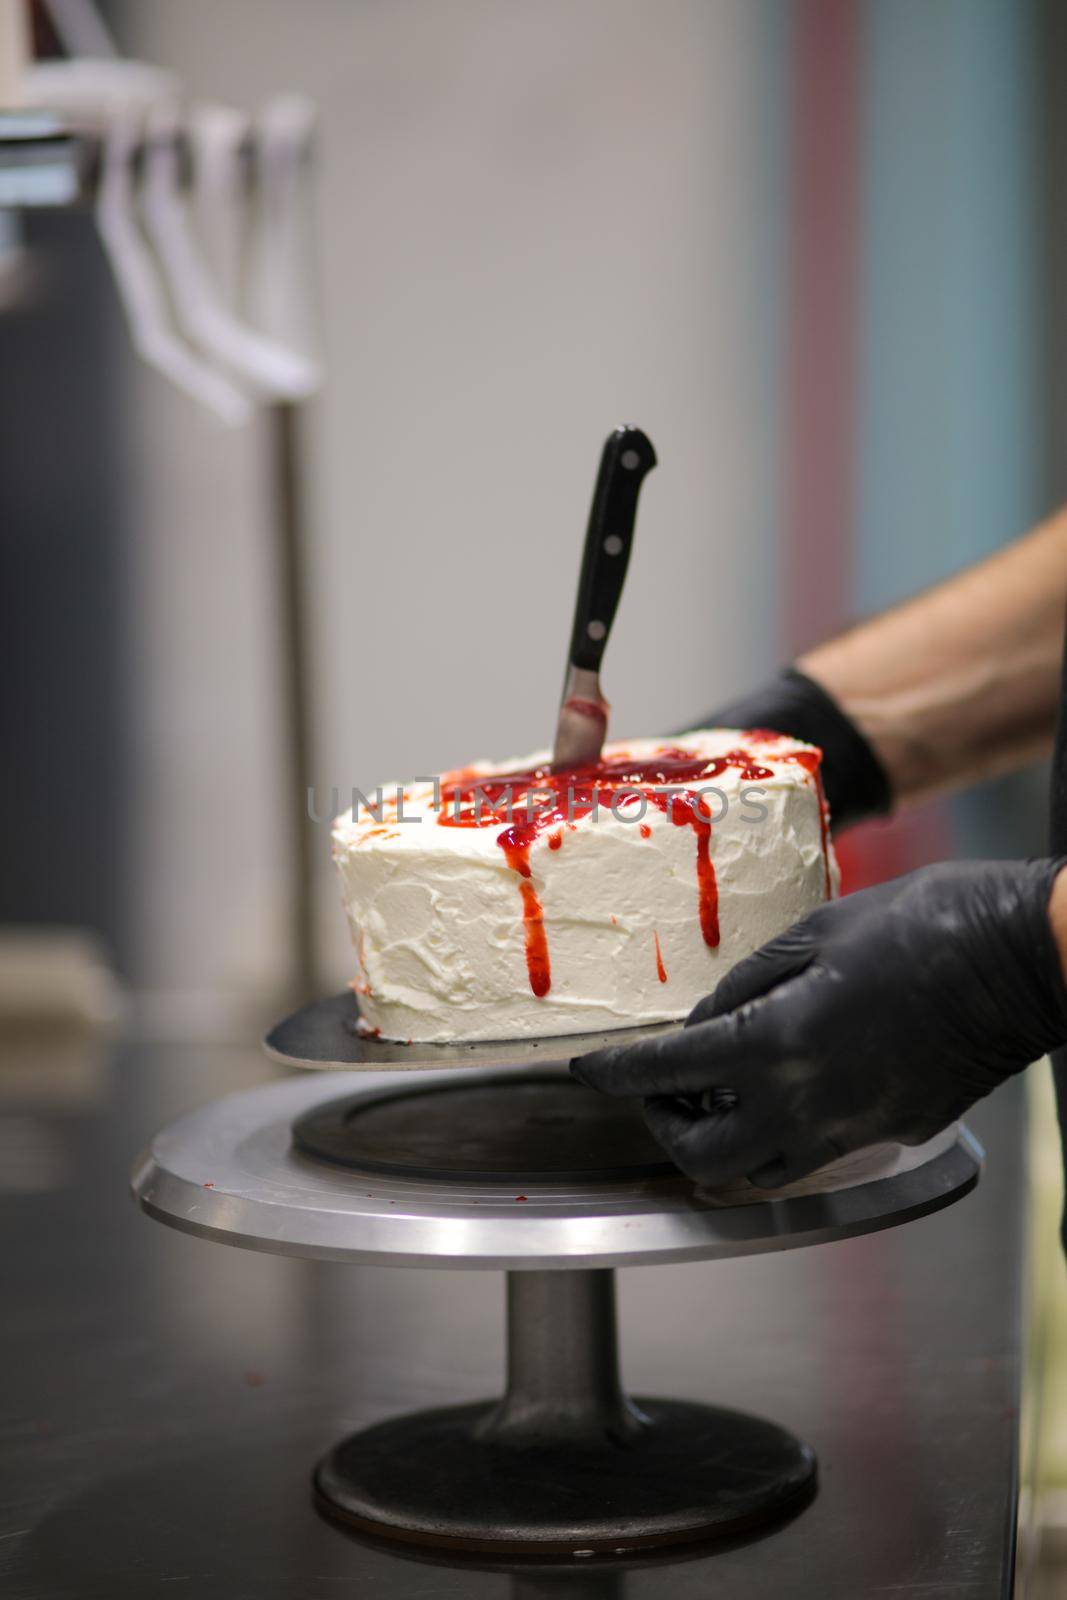 designer chef decorating white red bloody horror crime cake for halloween party by verbano